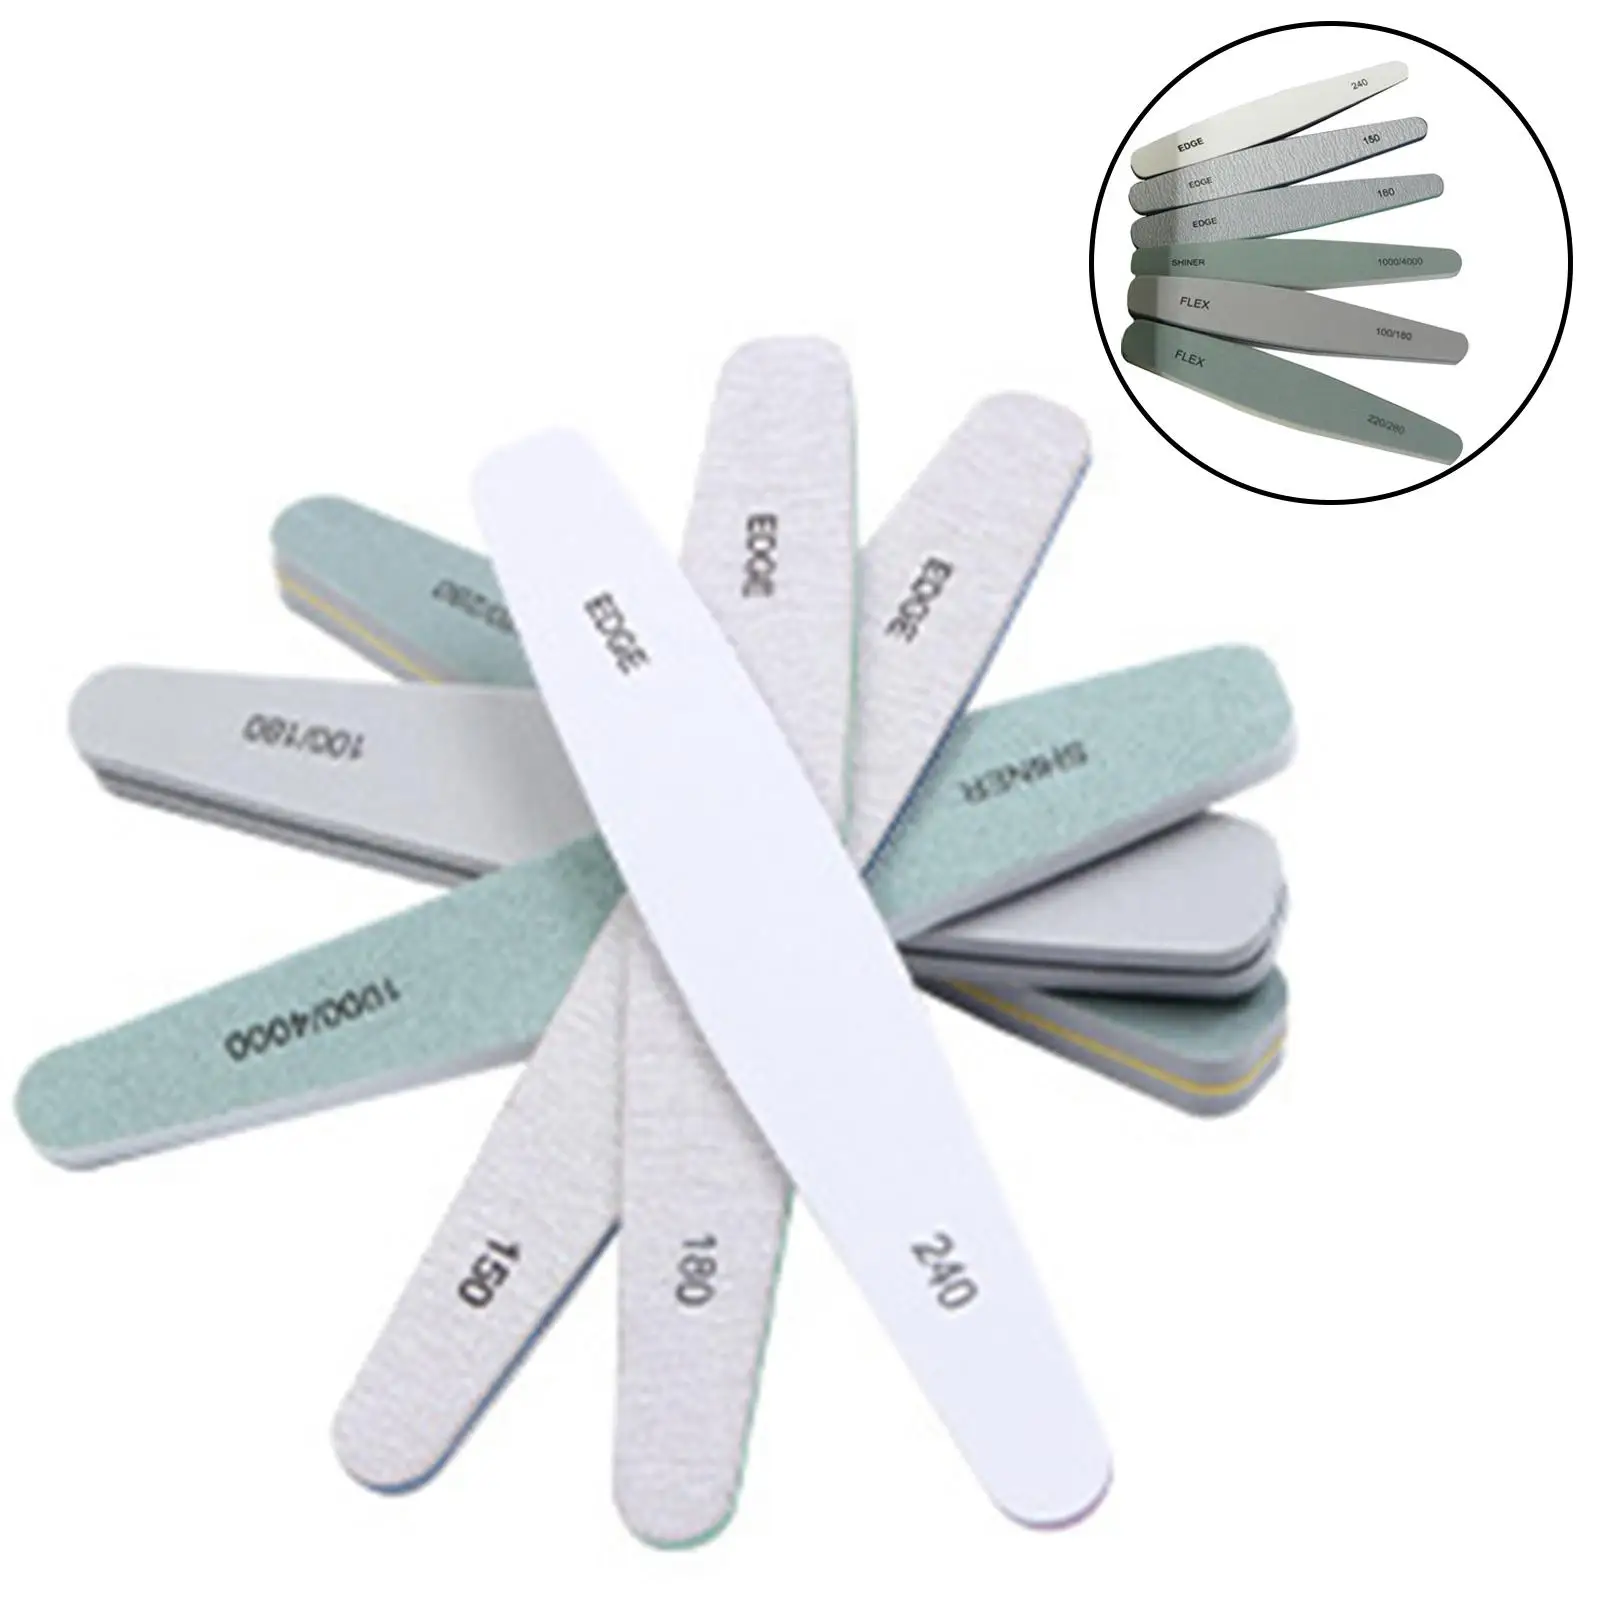 6Pcs Nail files Set Double Sided Compact 280 1000 4000 Grit Polisher Buffer Stick Buffing Block for  Nails Gel Nails Women Home